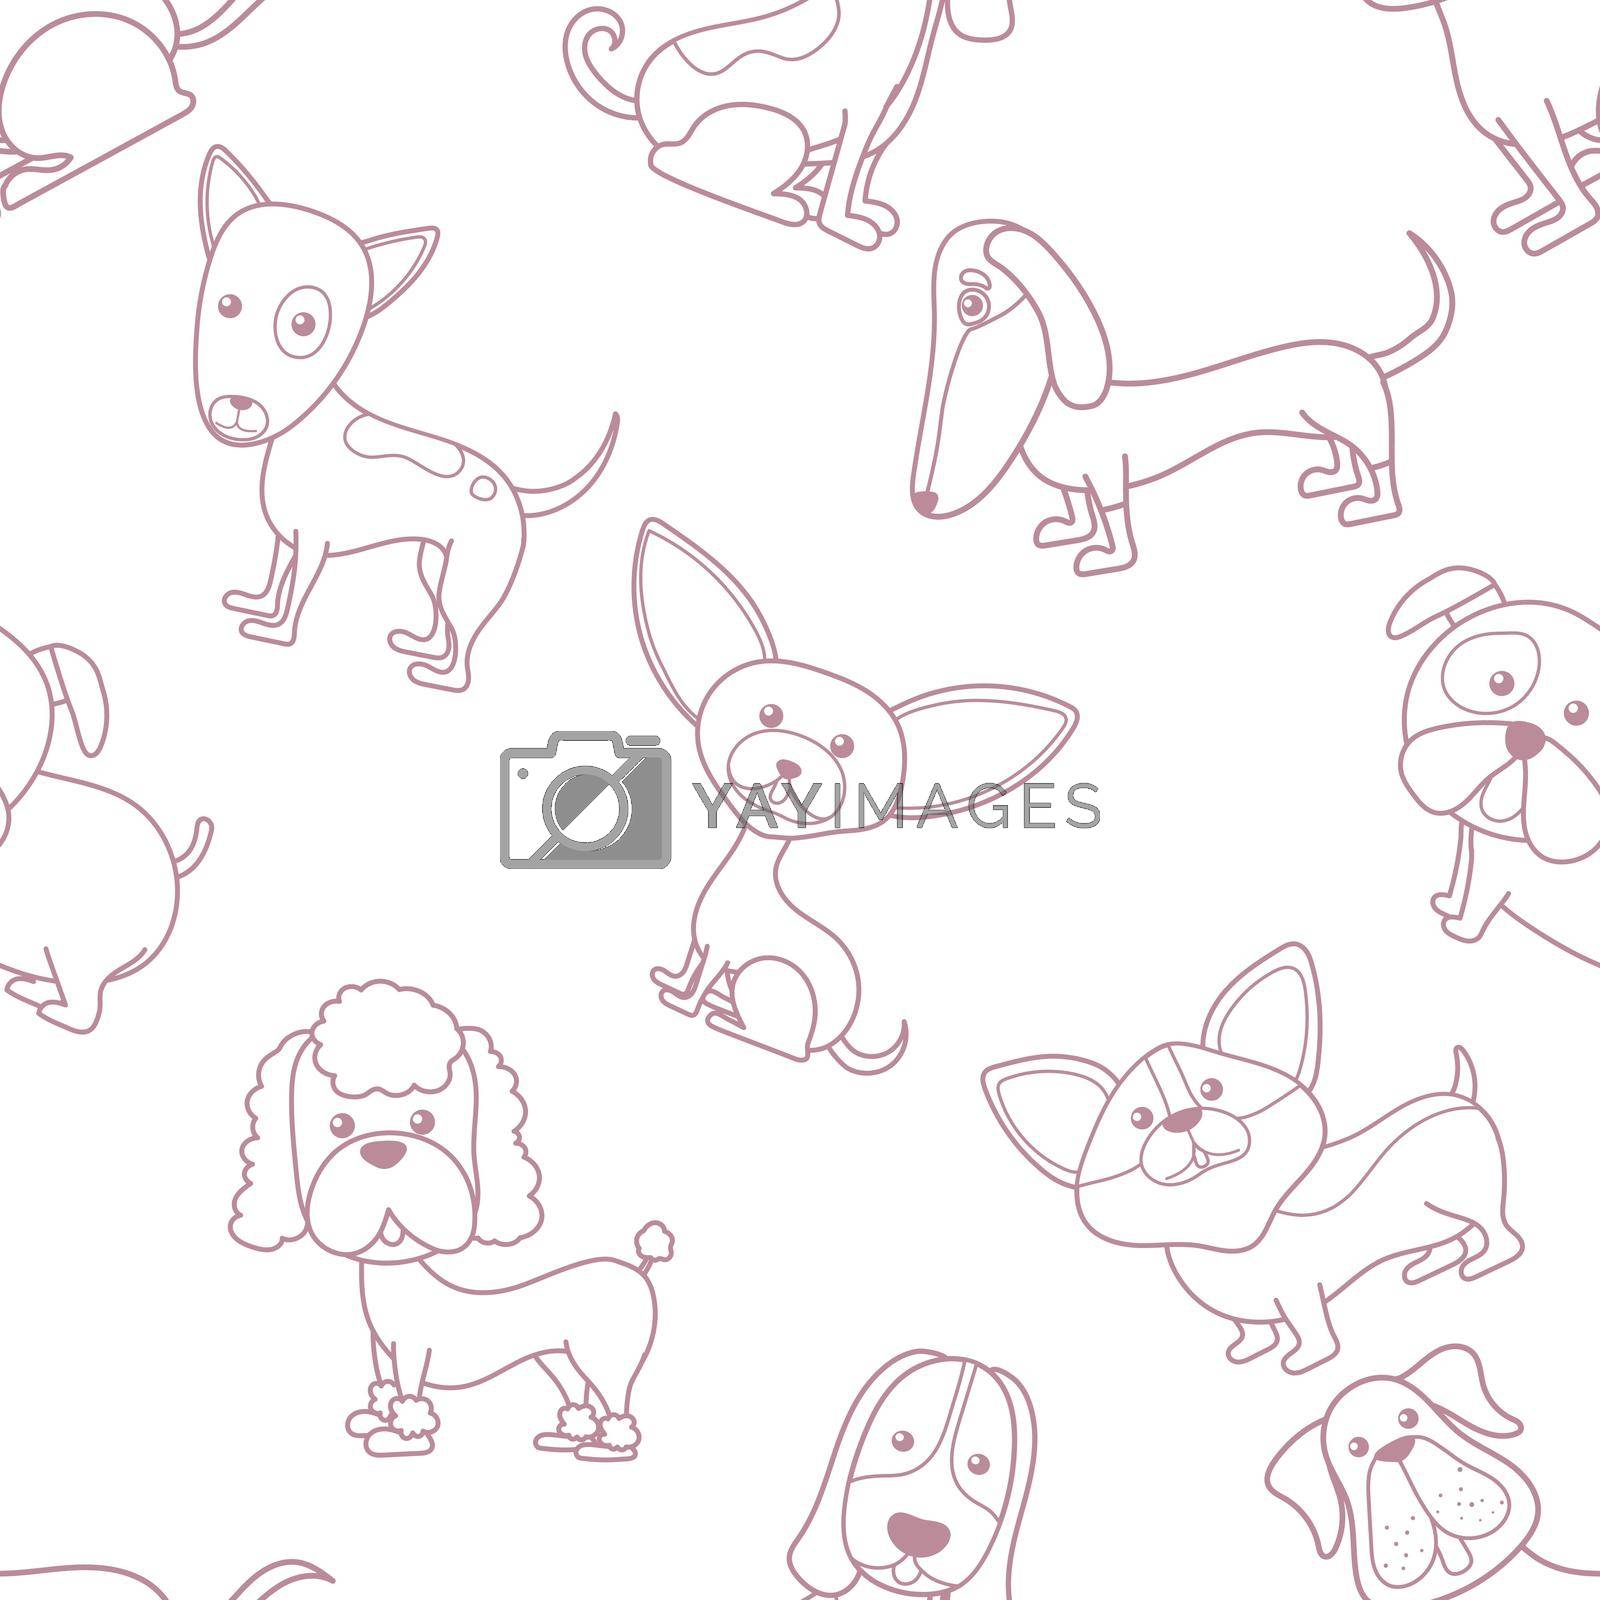 Royalty free image of Seamless cute dog outline cartoon pattern by valueinvestor